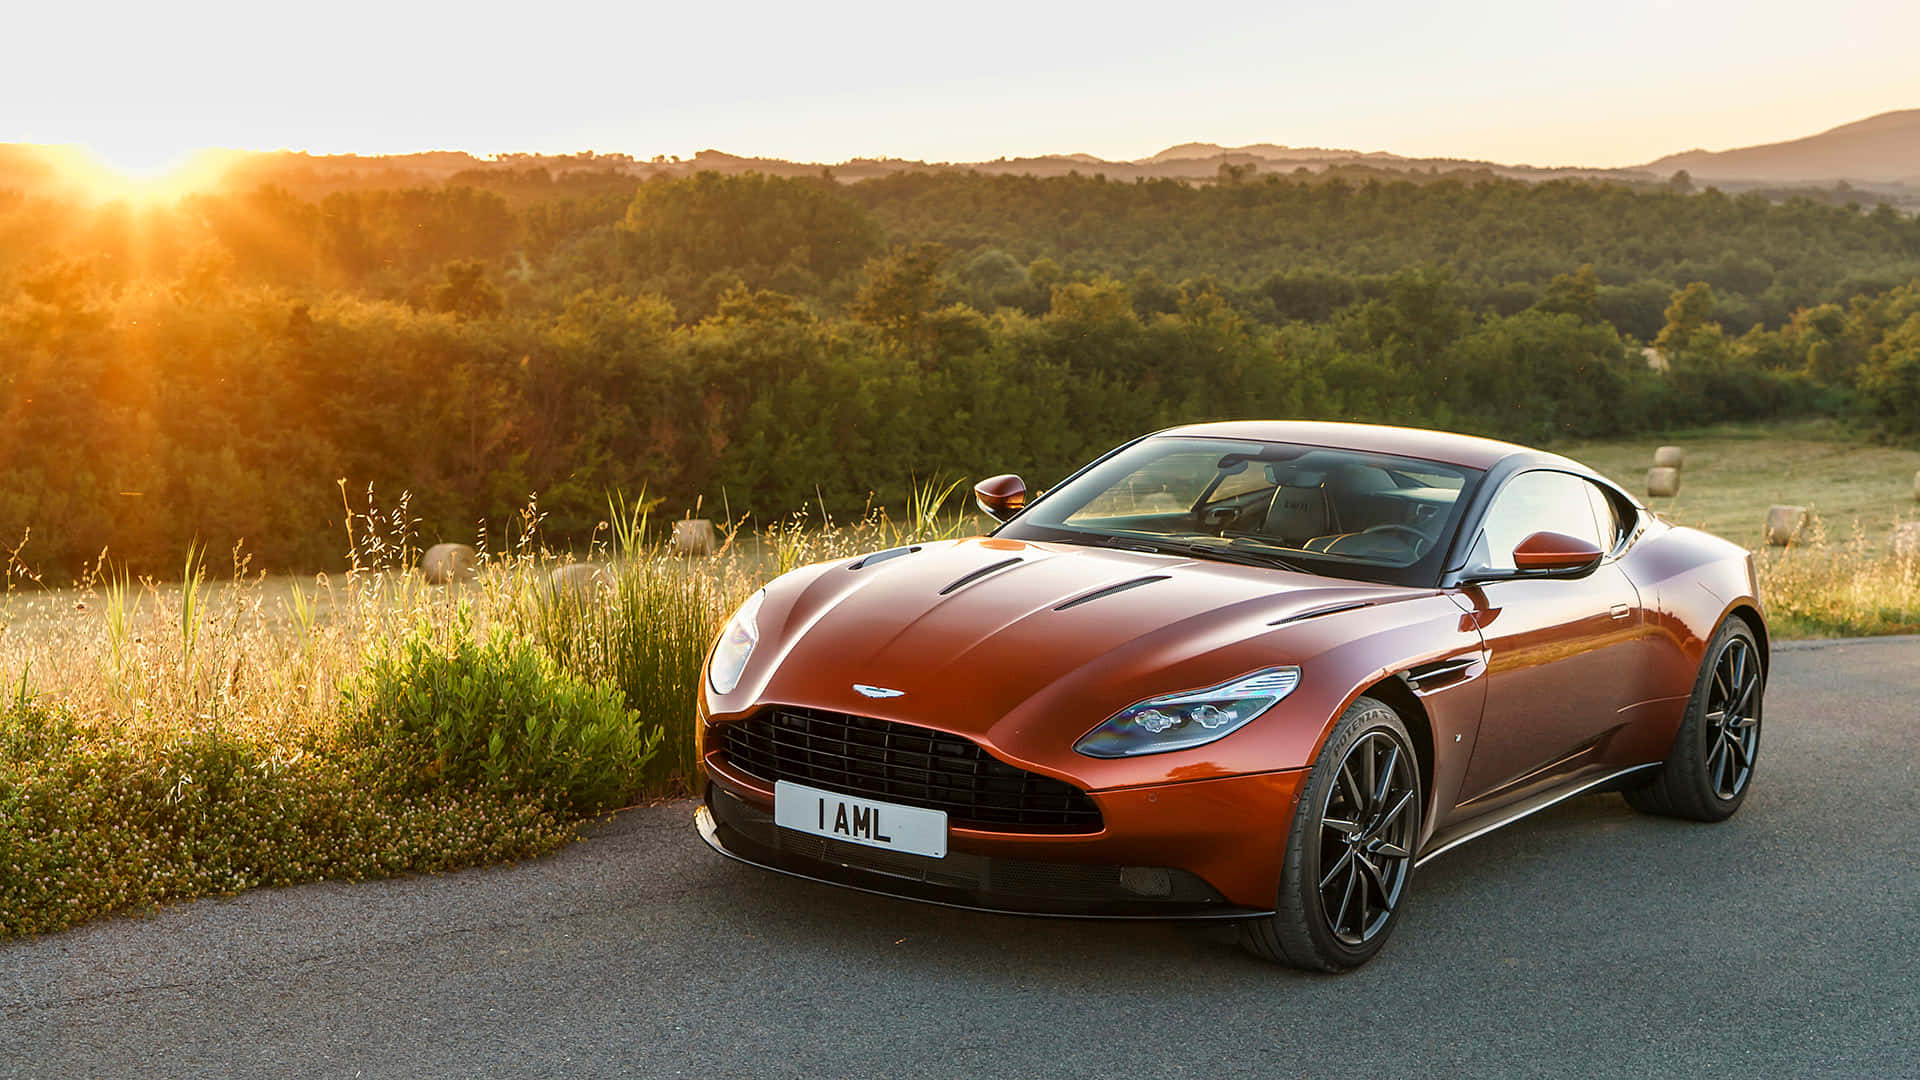 Aston Martin DB11 - The Epitome of British Luxury and Performance Wallpaper